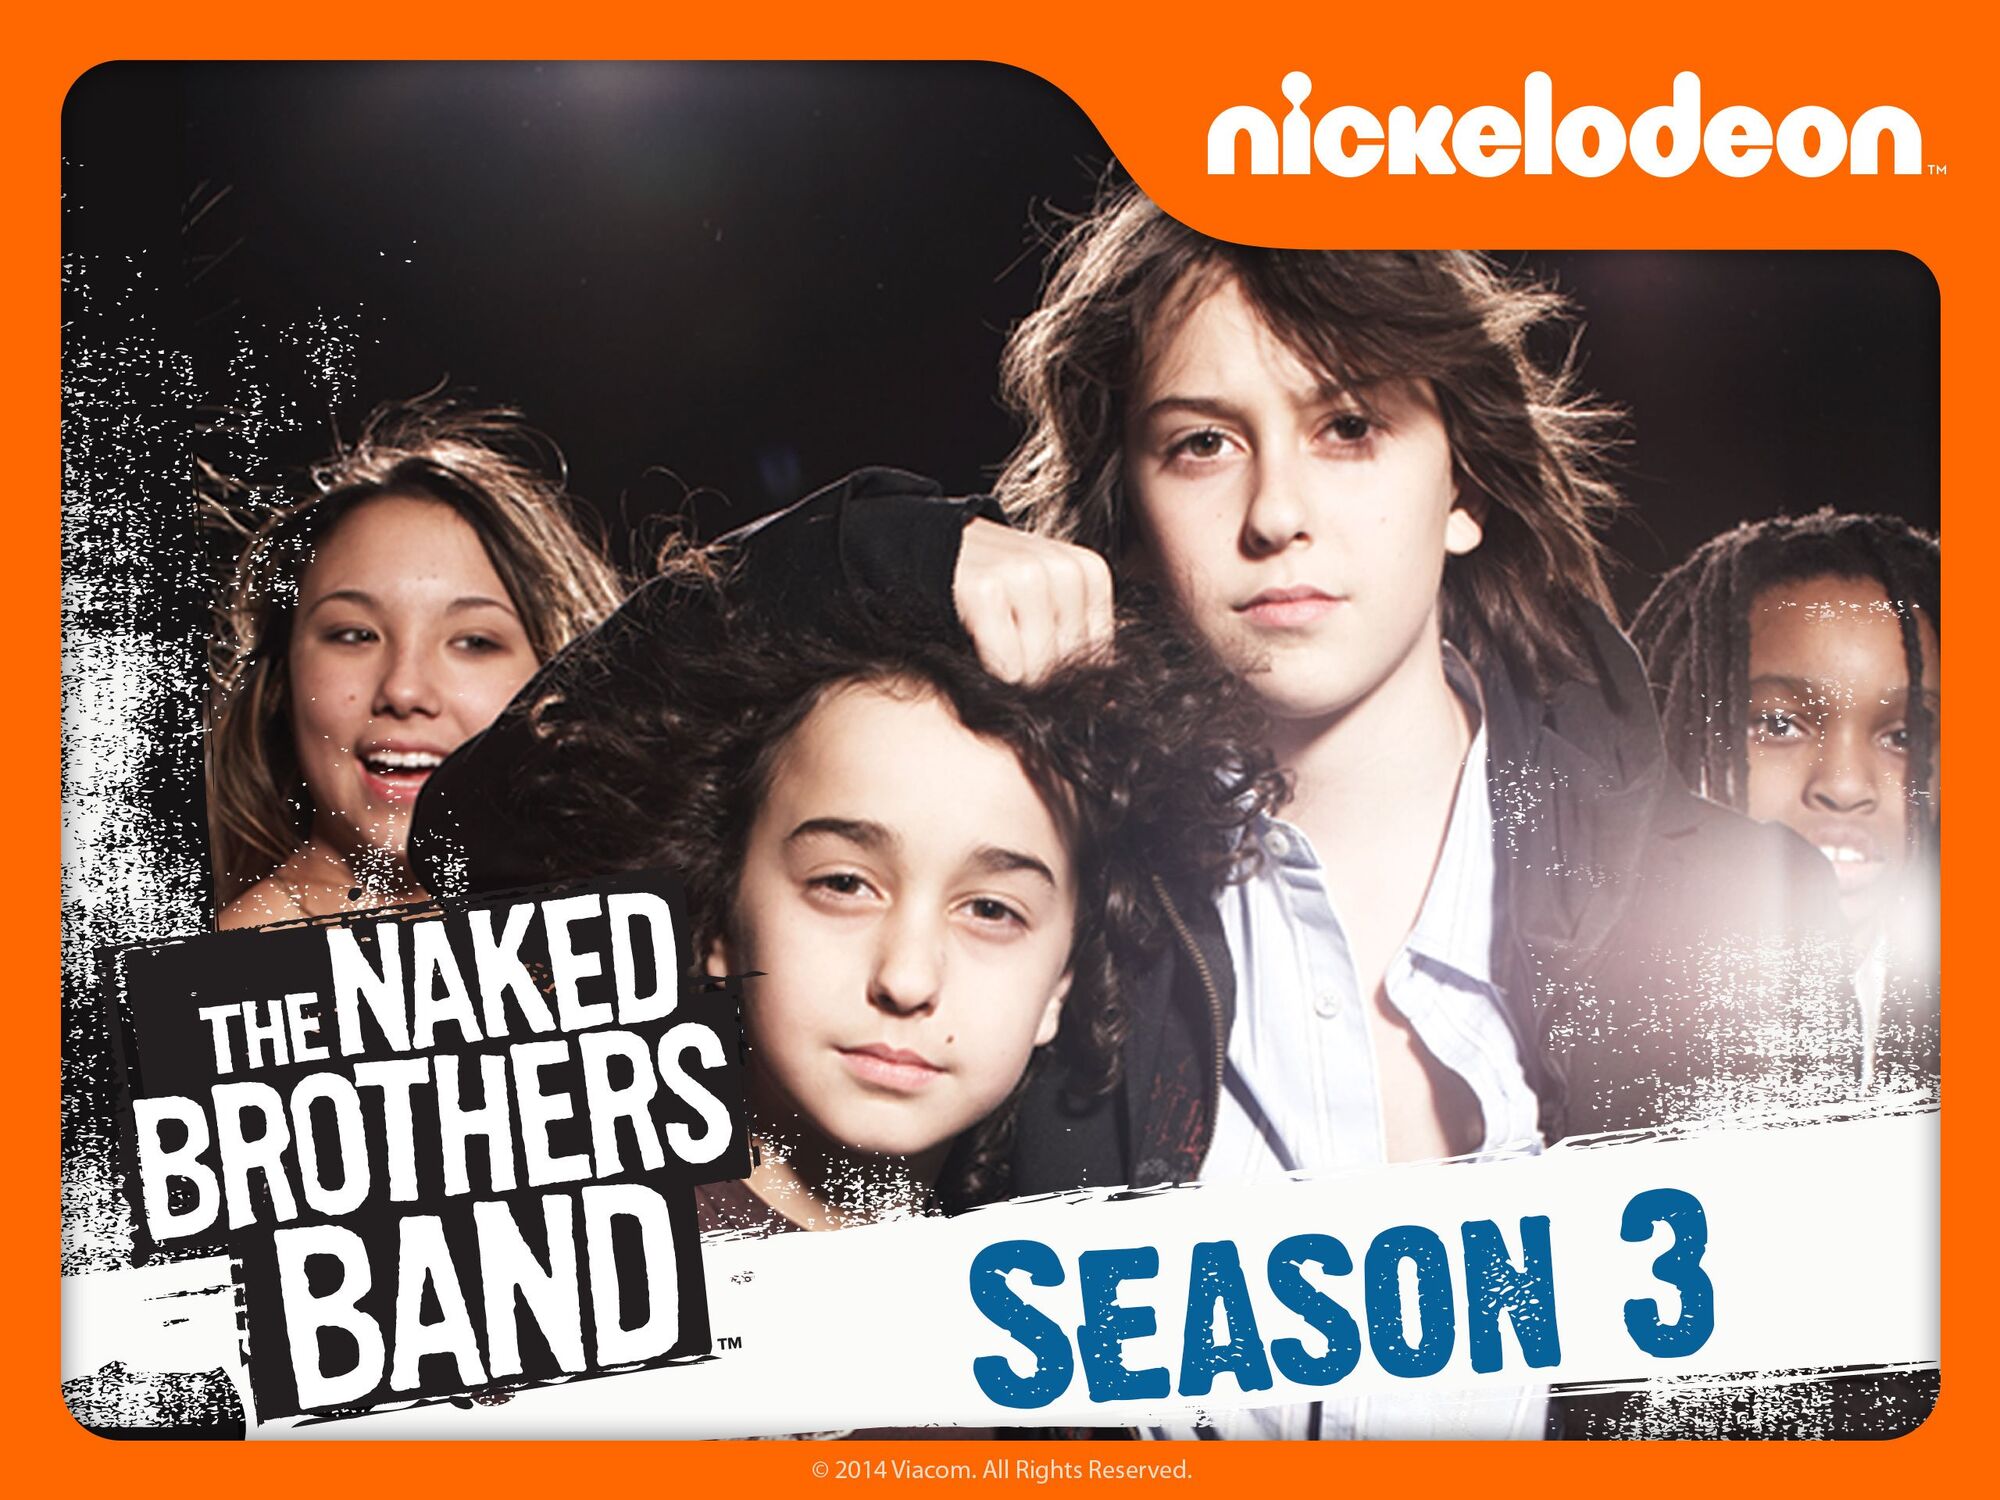 The Naked Brothers Band, Season 3 on iTunes